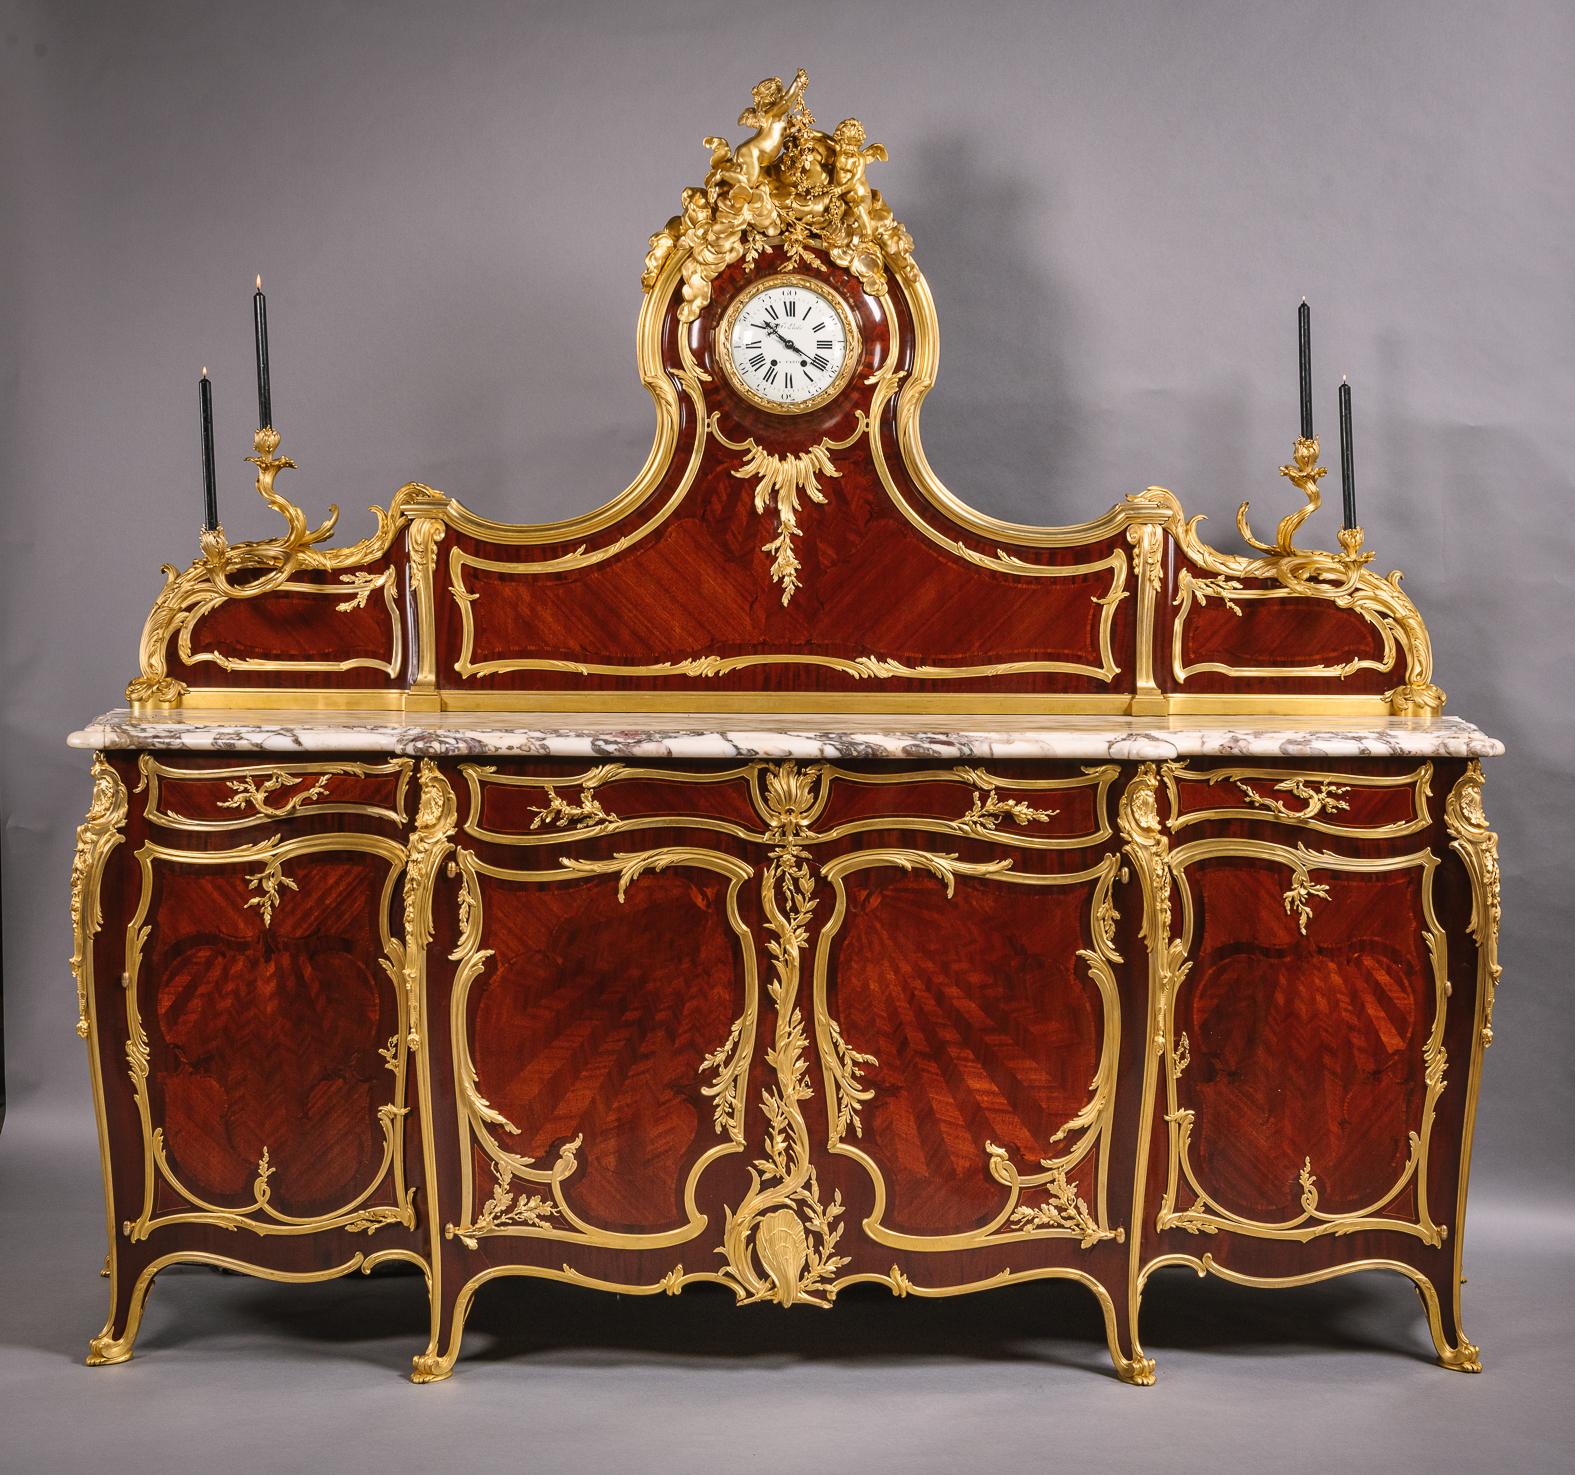 A Rare  Belle Epoque Gilt-Bronze Mounted Parquetry Inlaid Grand Buffet, By François Linke, The Mounts Designed by Léon Messagé. 

Signed to the right corner clasp ‘Linke’ 
The enamel clock dial with Roman numerals and Signed ‘F Linke A PARIS’.	
The